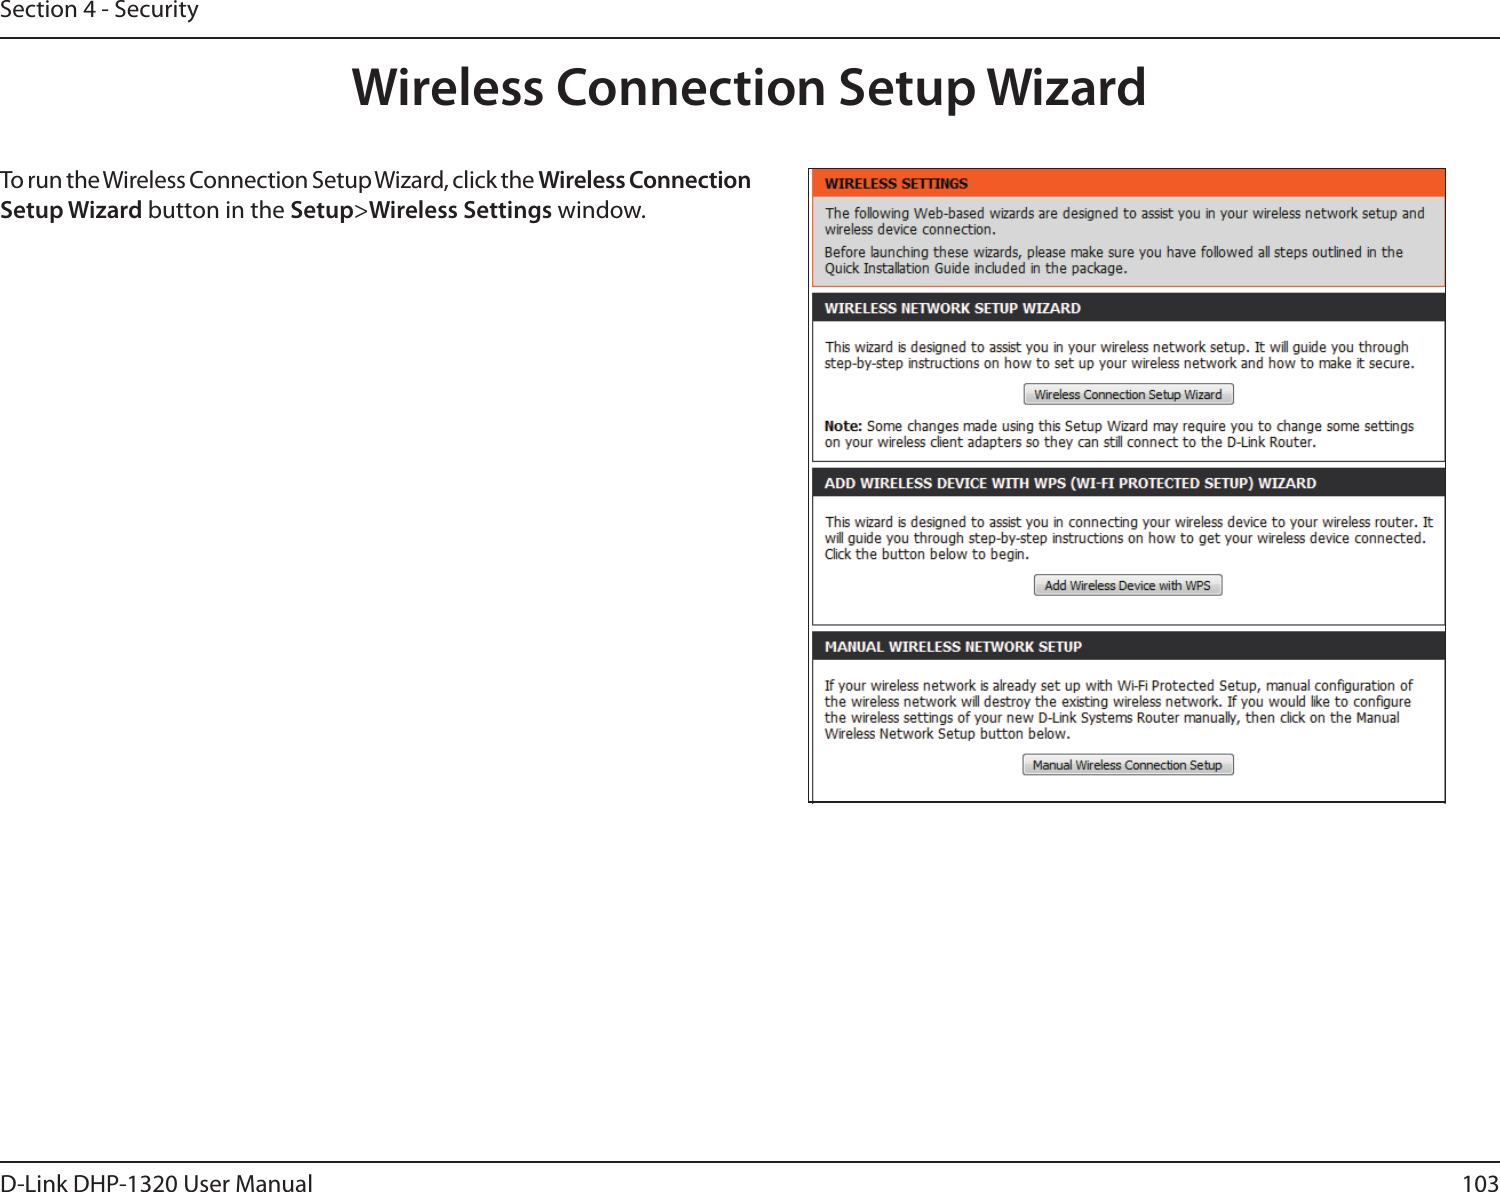 103D-Link DHP-1320 User ManualSection 4 - SecurityWireless Connection Setup WizardTo run the Wireless Connection Setup Wizard, click the Wireless Connection Setup Wizard button in the Setup&gt;Wireless Settings window.